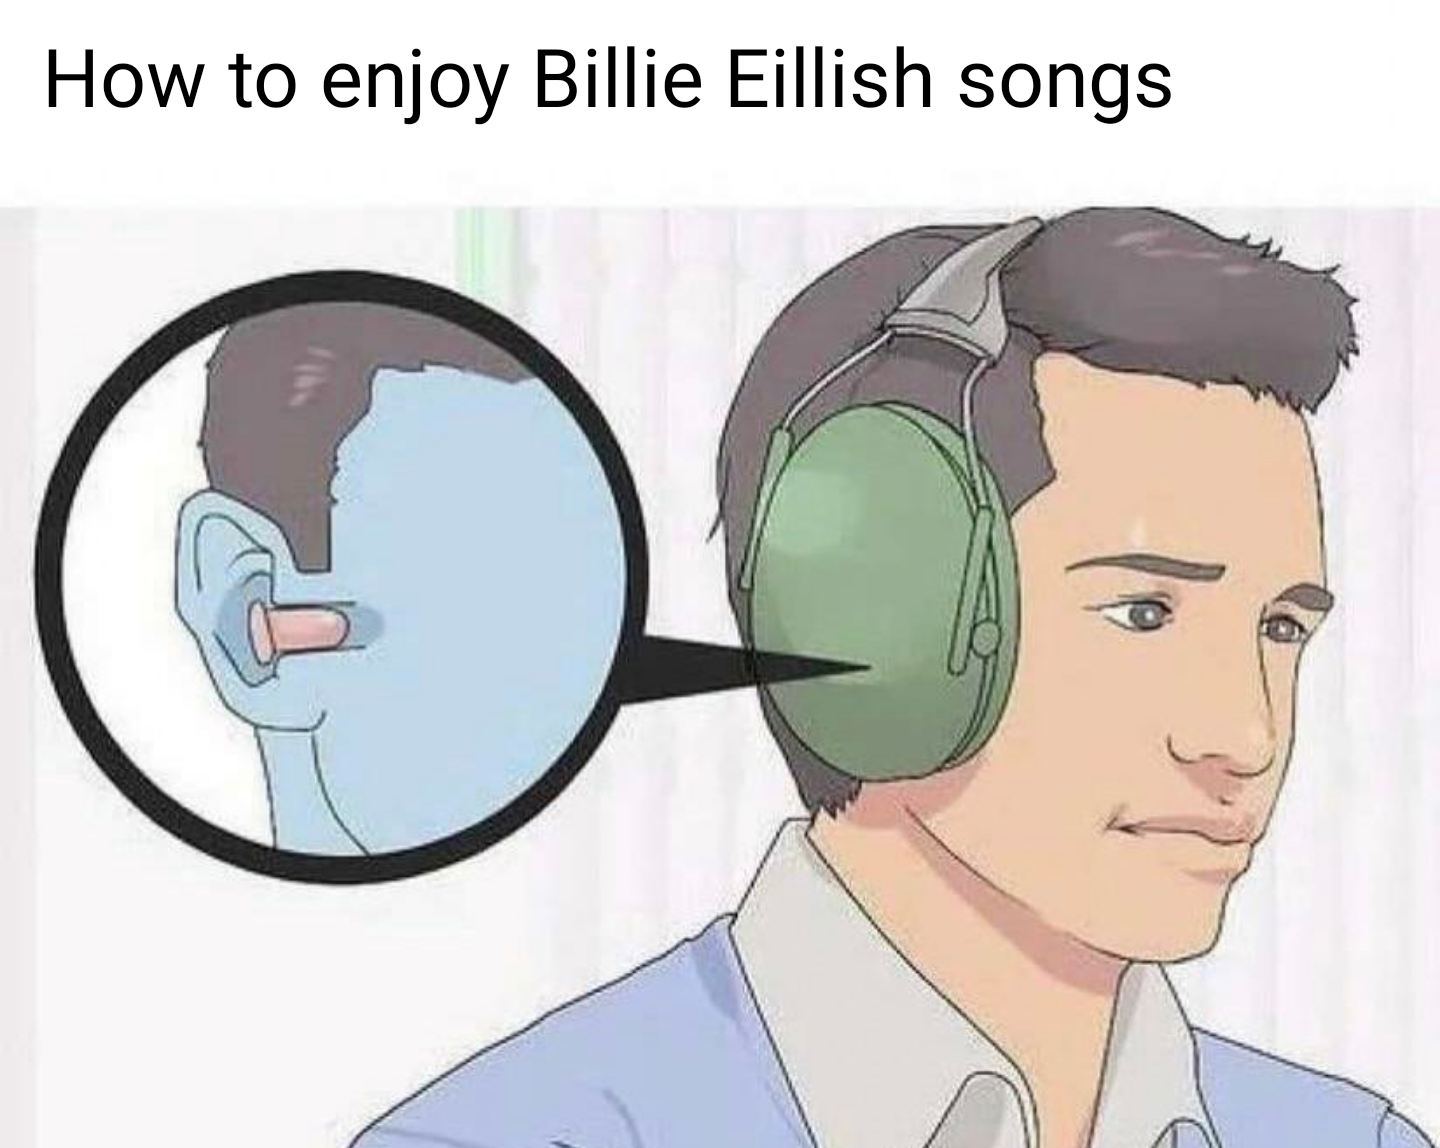 wikihow out of context - How to enjoy Billie Eillish songs